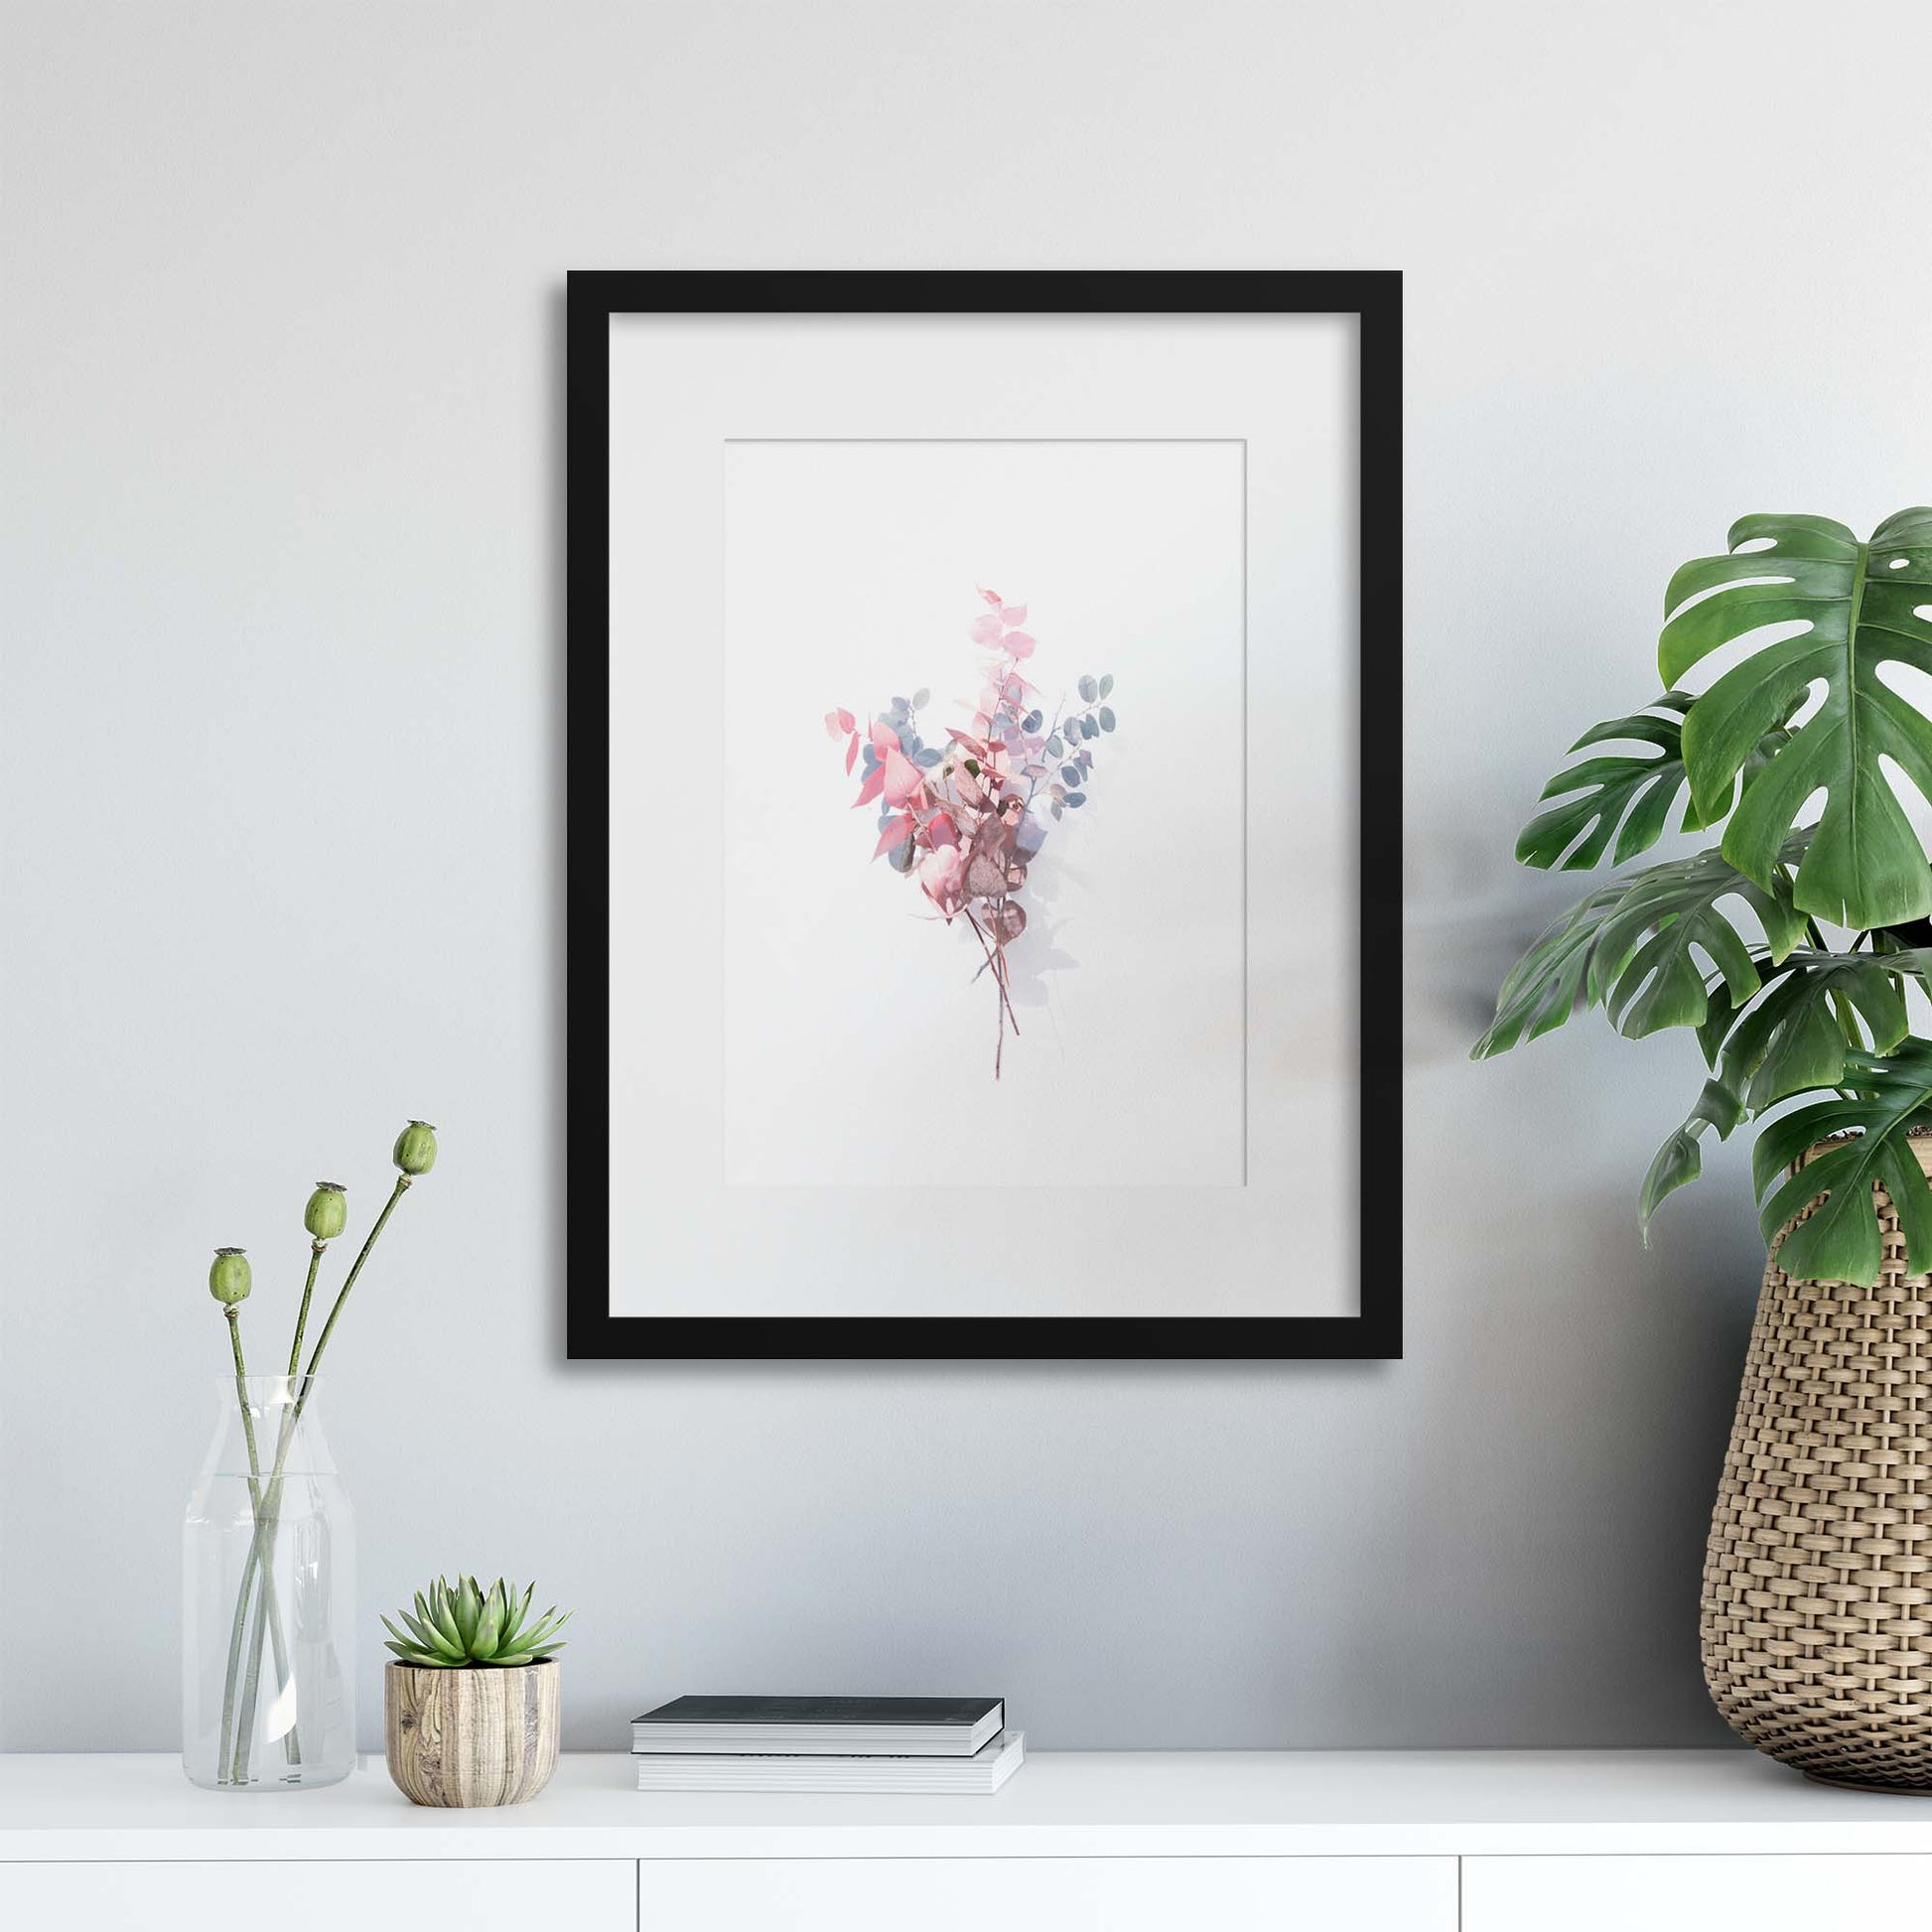 Delicate Shadows Collection No.4 Framed Print - USTAD HOME